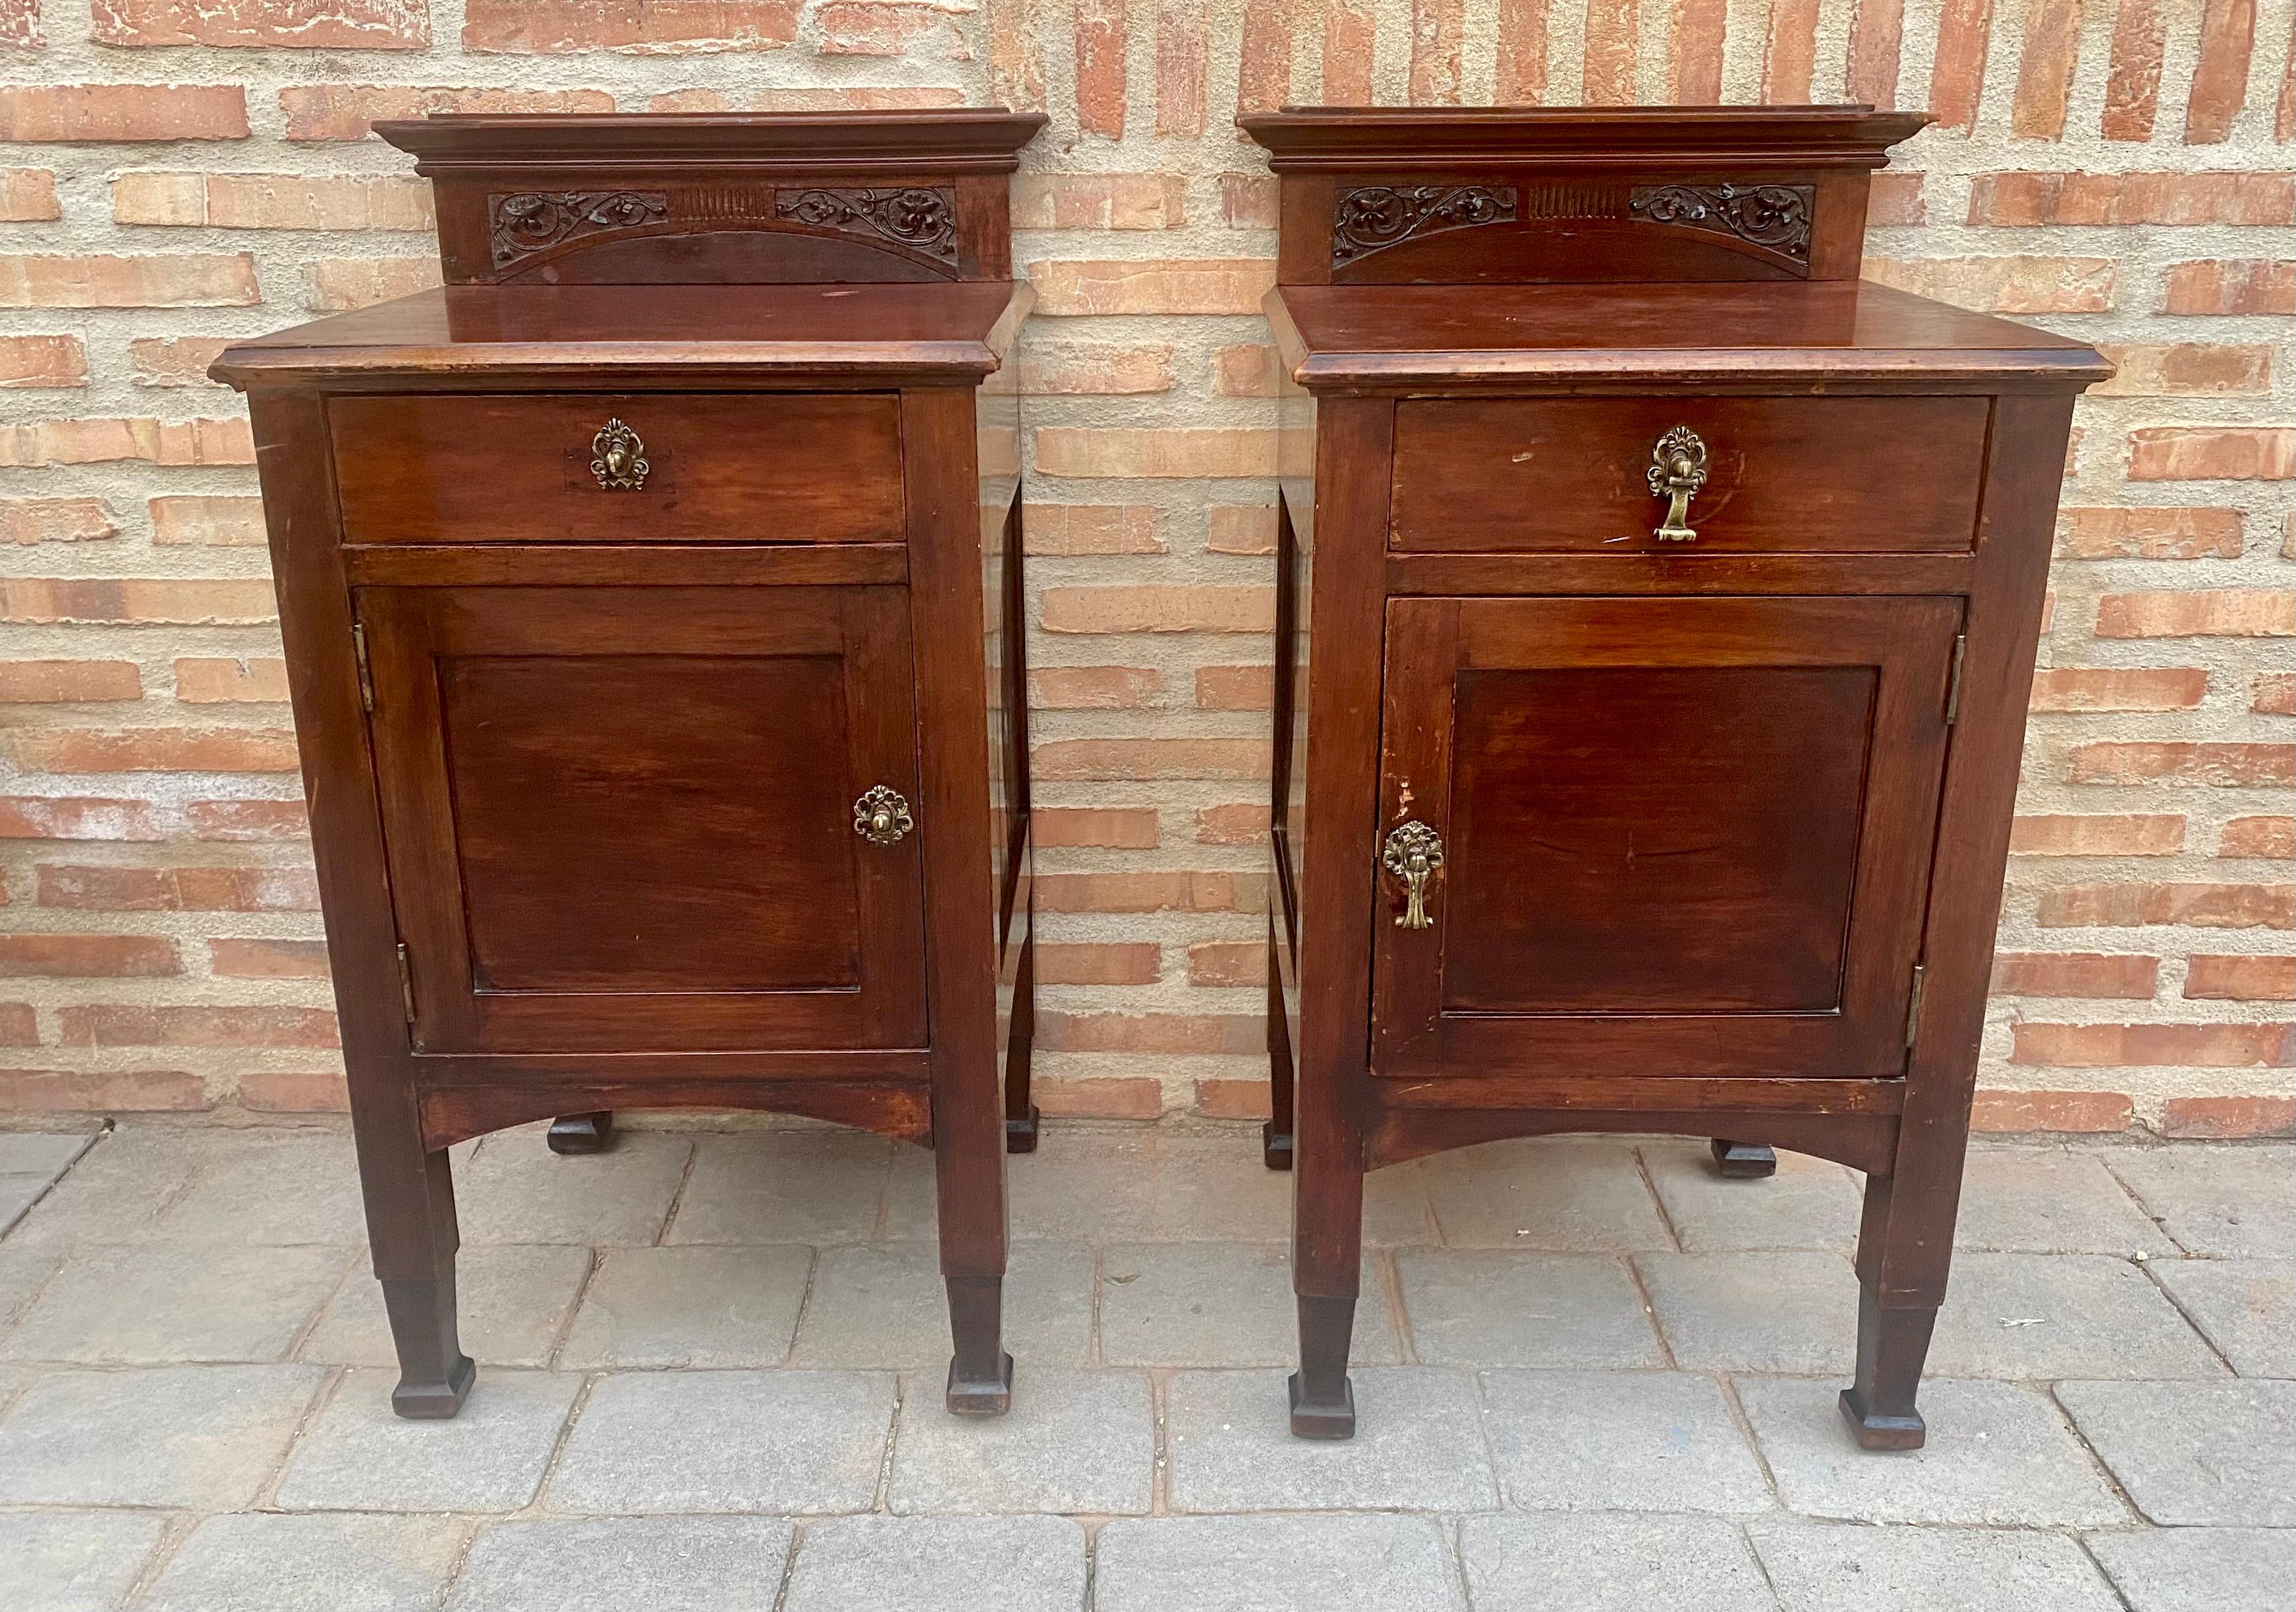 Pair of late 19th century Art Nouveau nightstands with carved tops, bronze handles, restored and wax polished. 
We observe small defects of use, but they are delivered completely restored, preserving their beauty and original conditioning of the